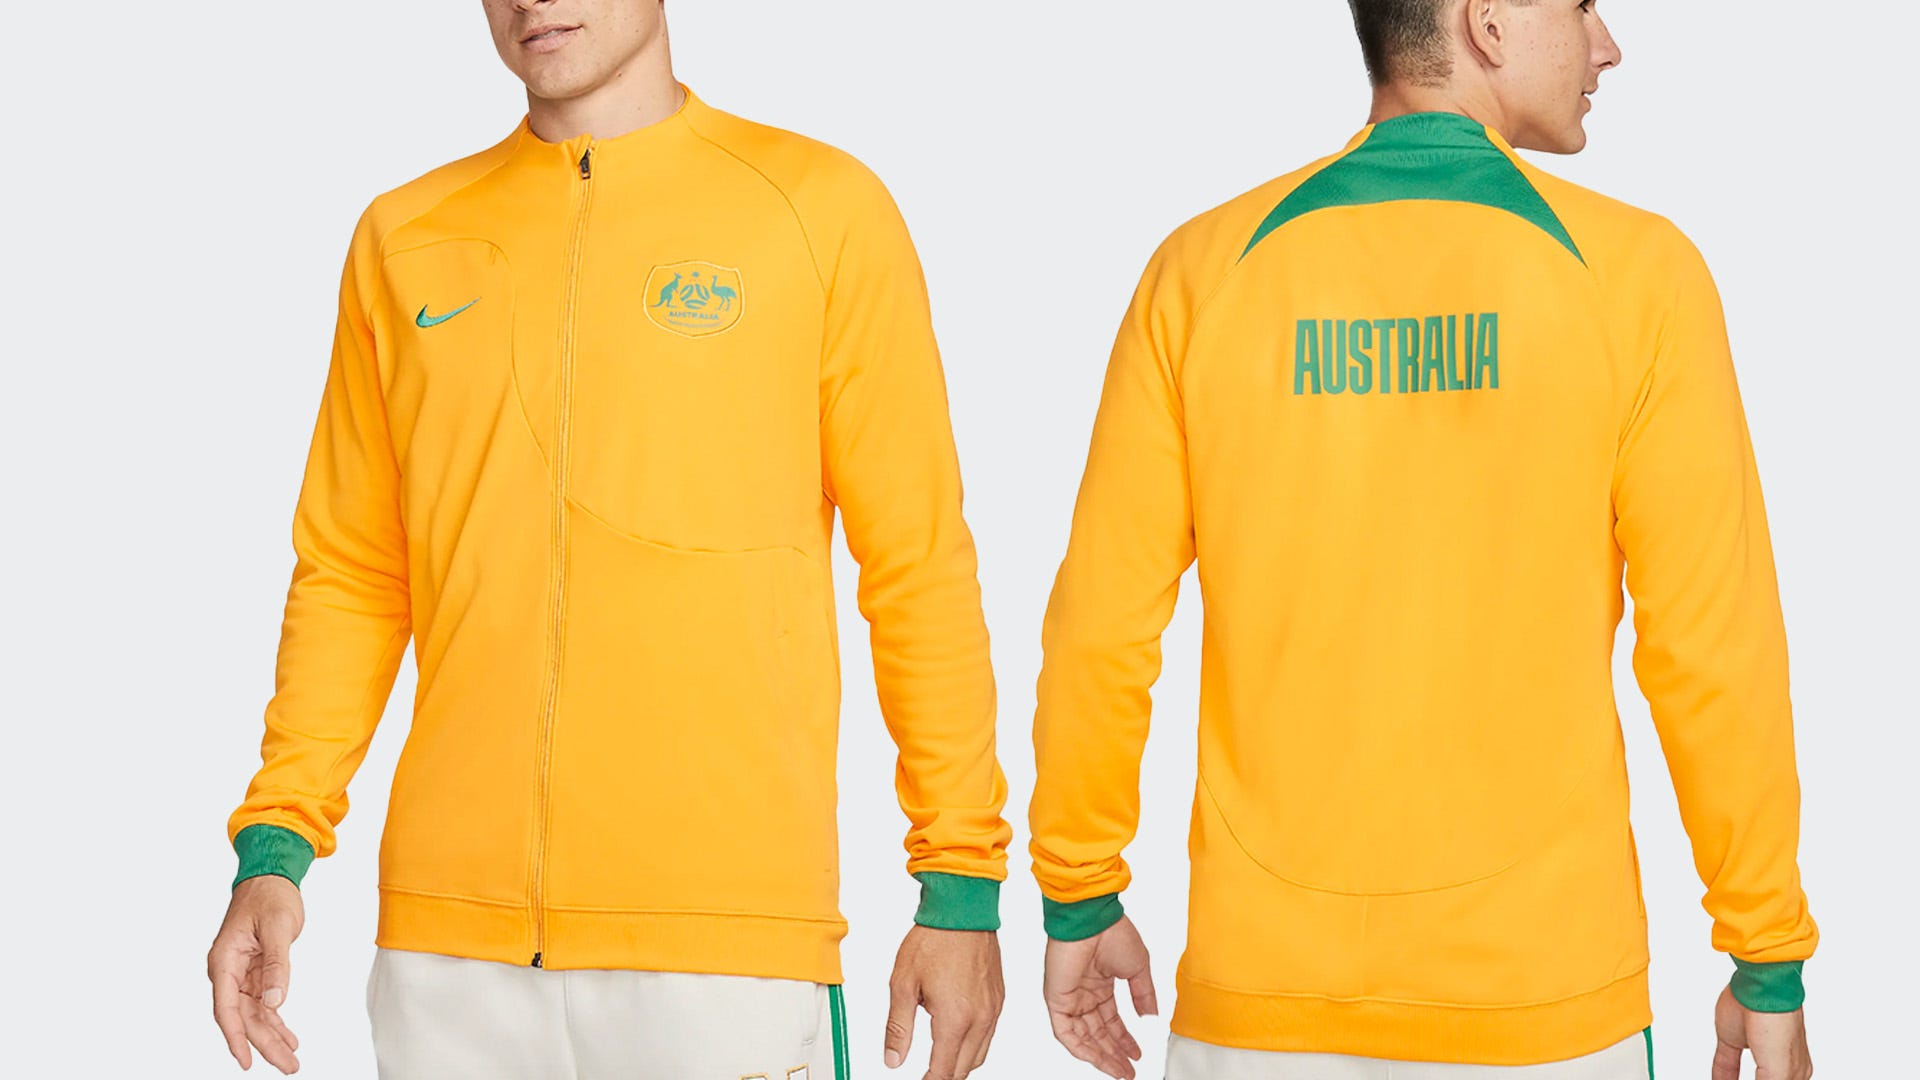 Socceroos home and away shirts